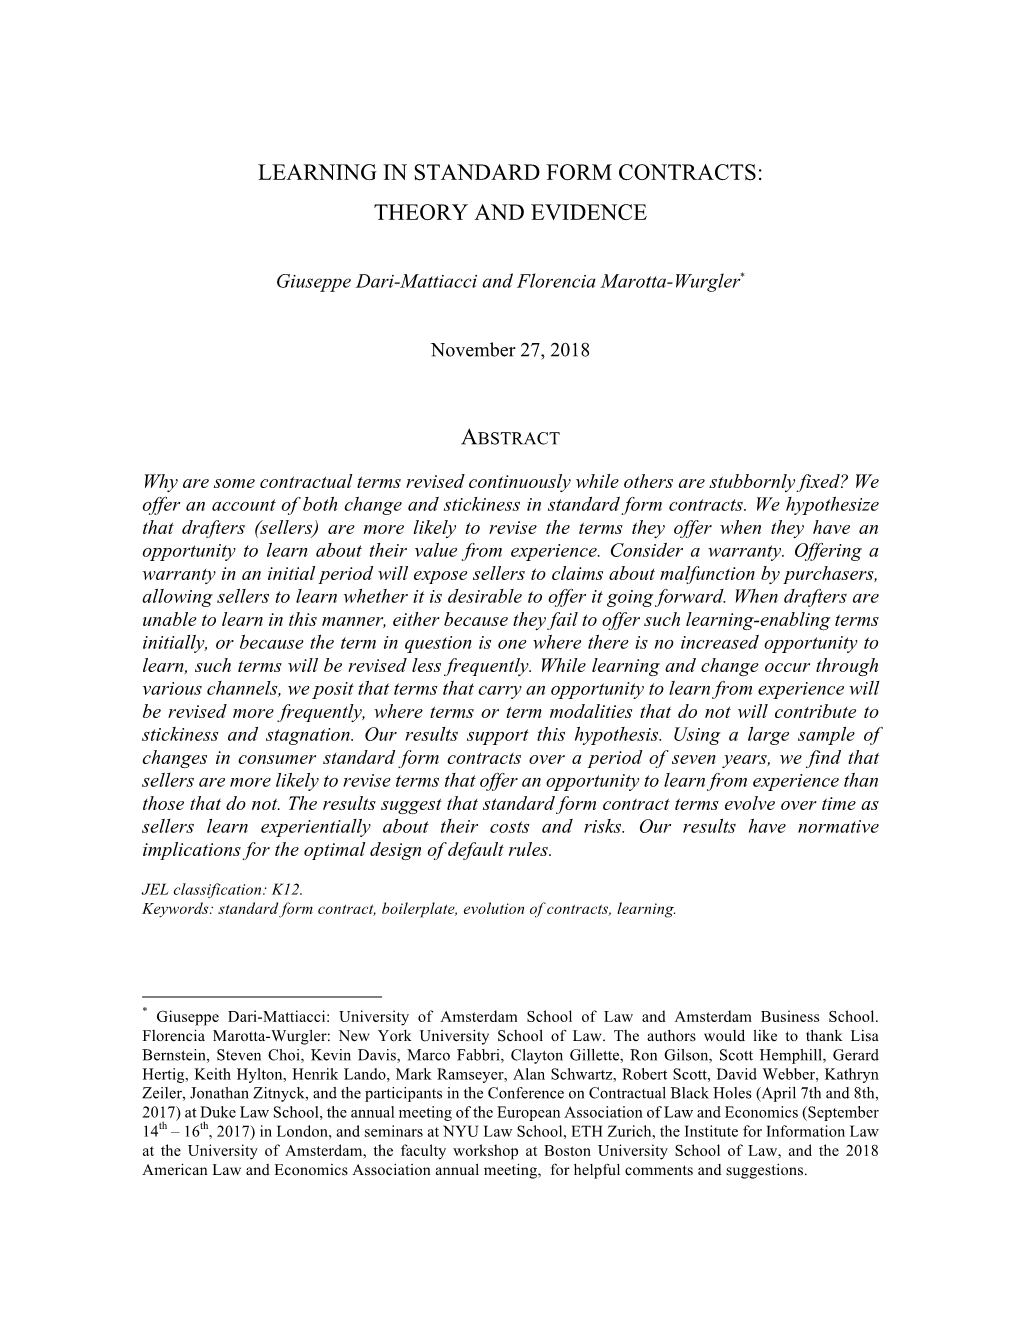 Learning in Standard Form Contracts: Theory and Evidence